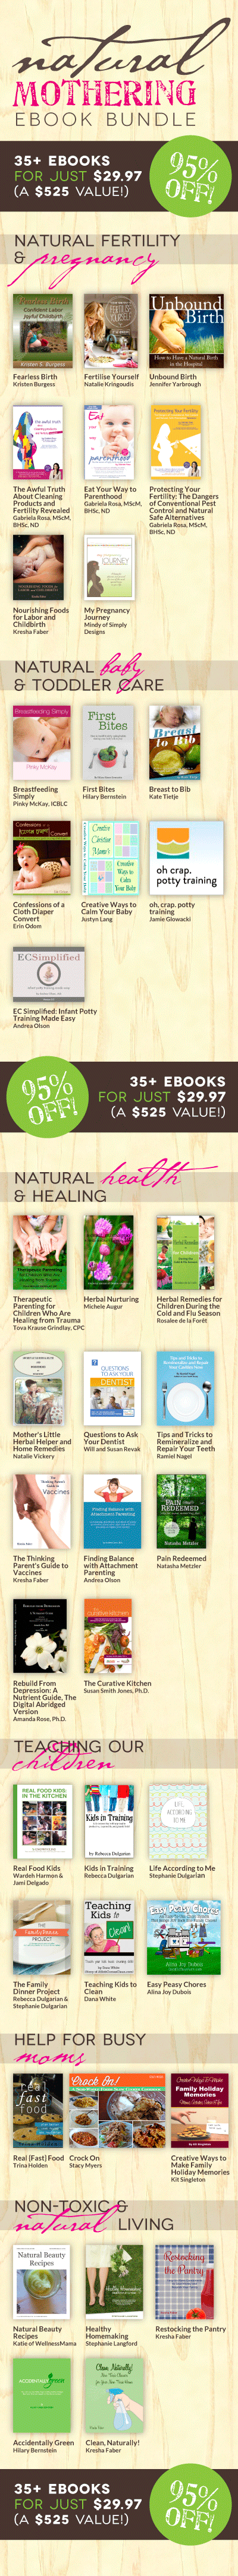 natural-mothering-all-books-tall (1)